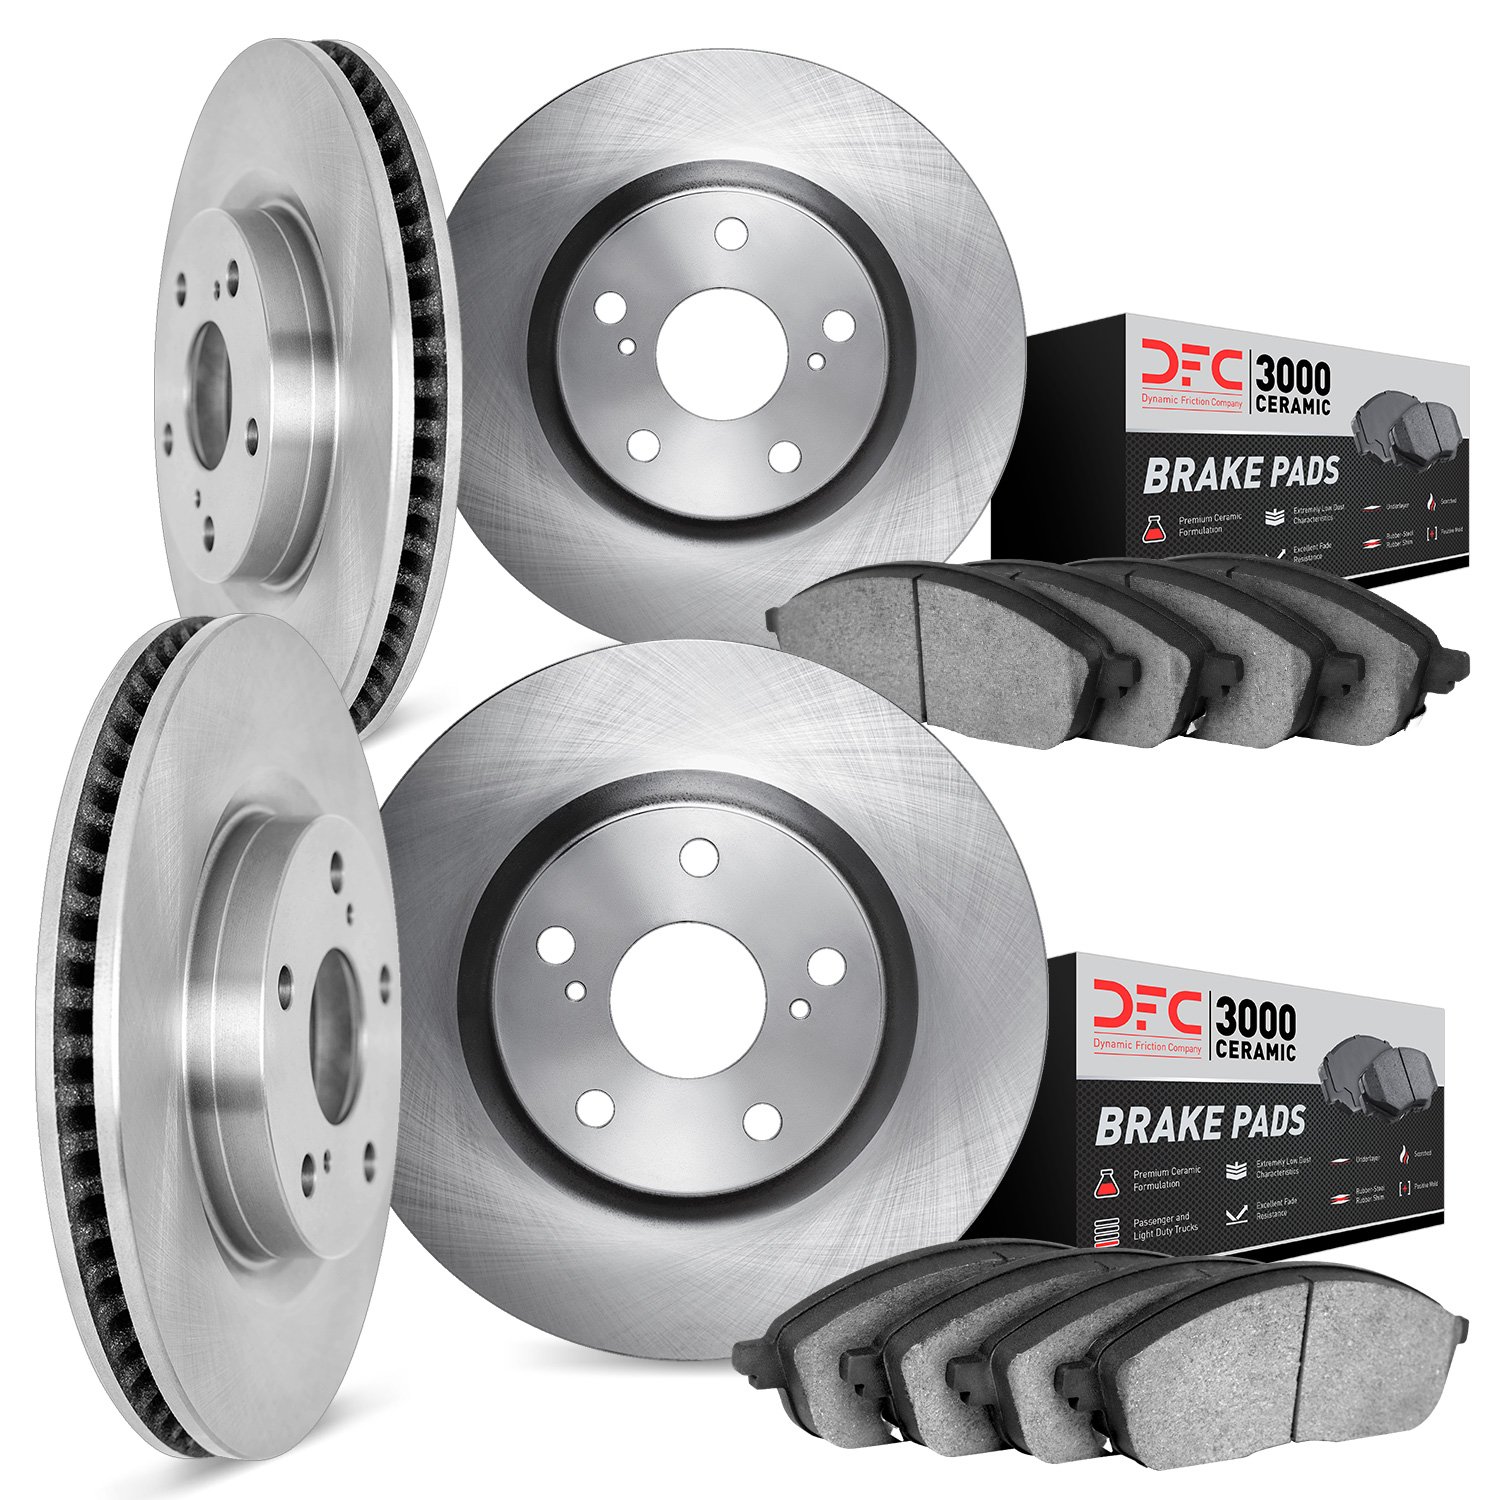 6304-31067 Brake Rotors with 3000-Series Ceramic Brake Pads Kit, 2008-2013 BMW, Position: Front and Rear